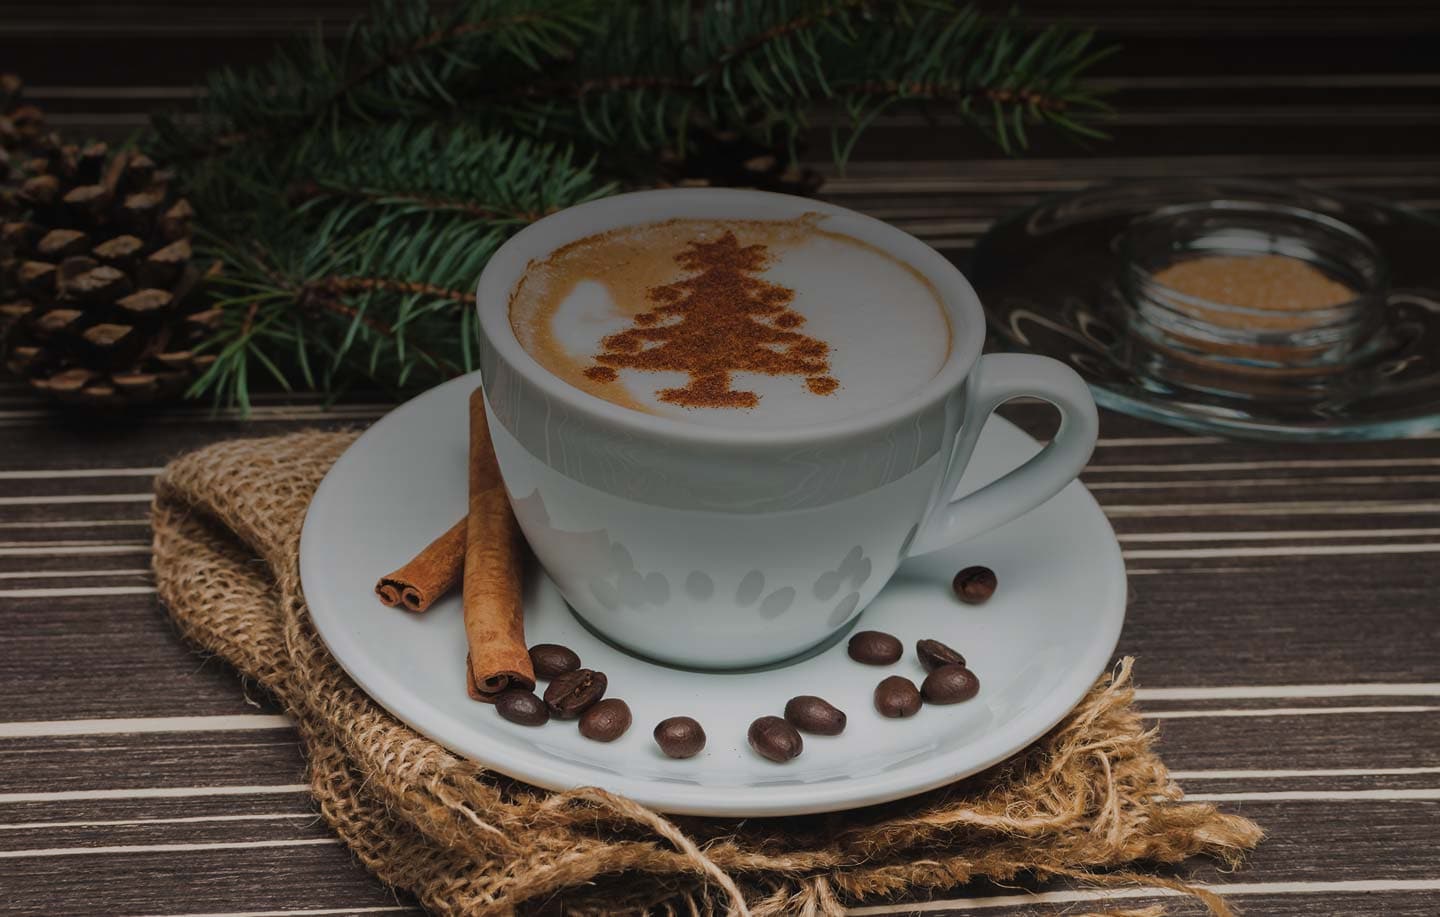 Best Christmas gifts for coffee lovers